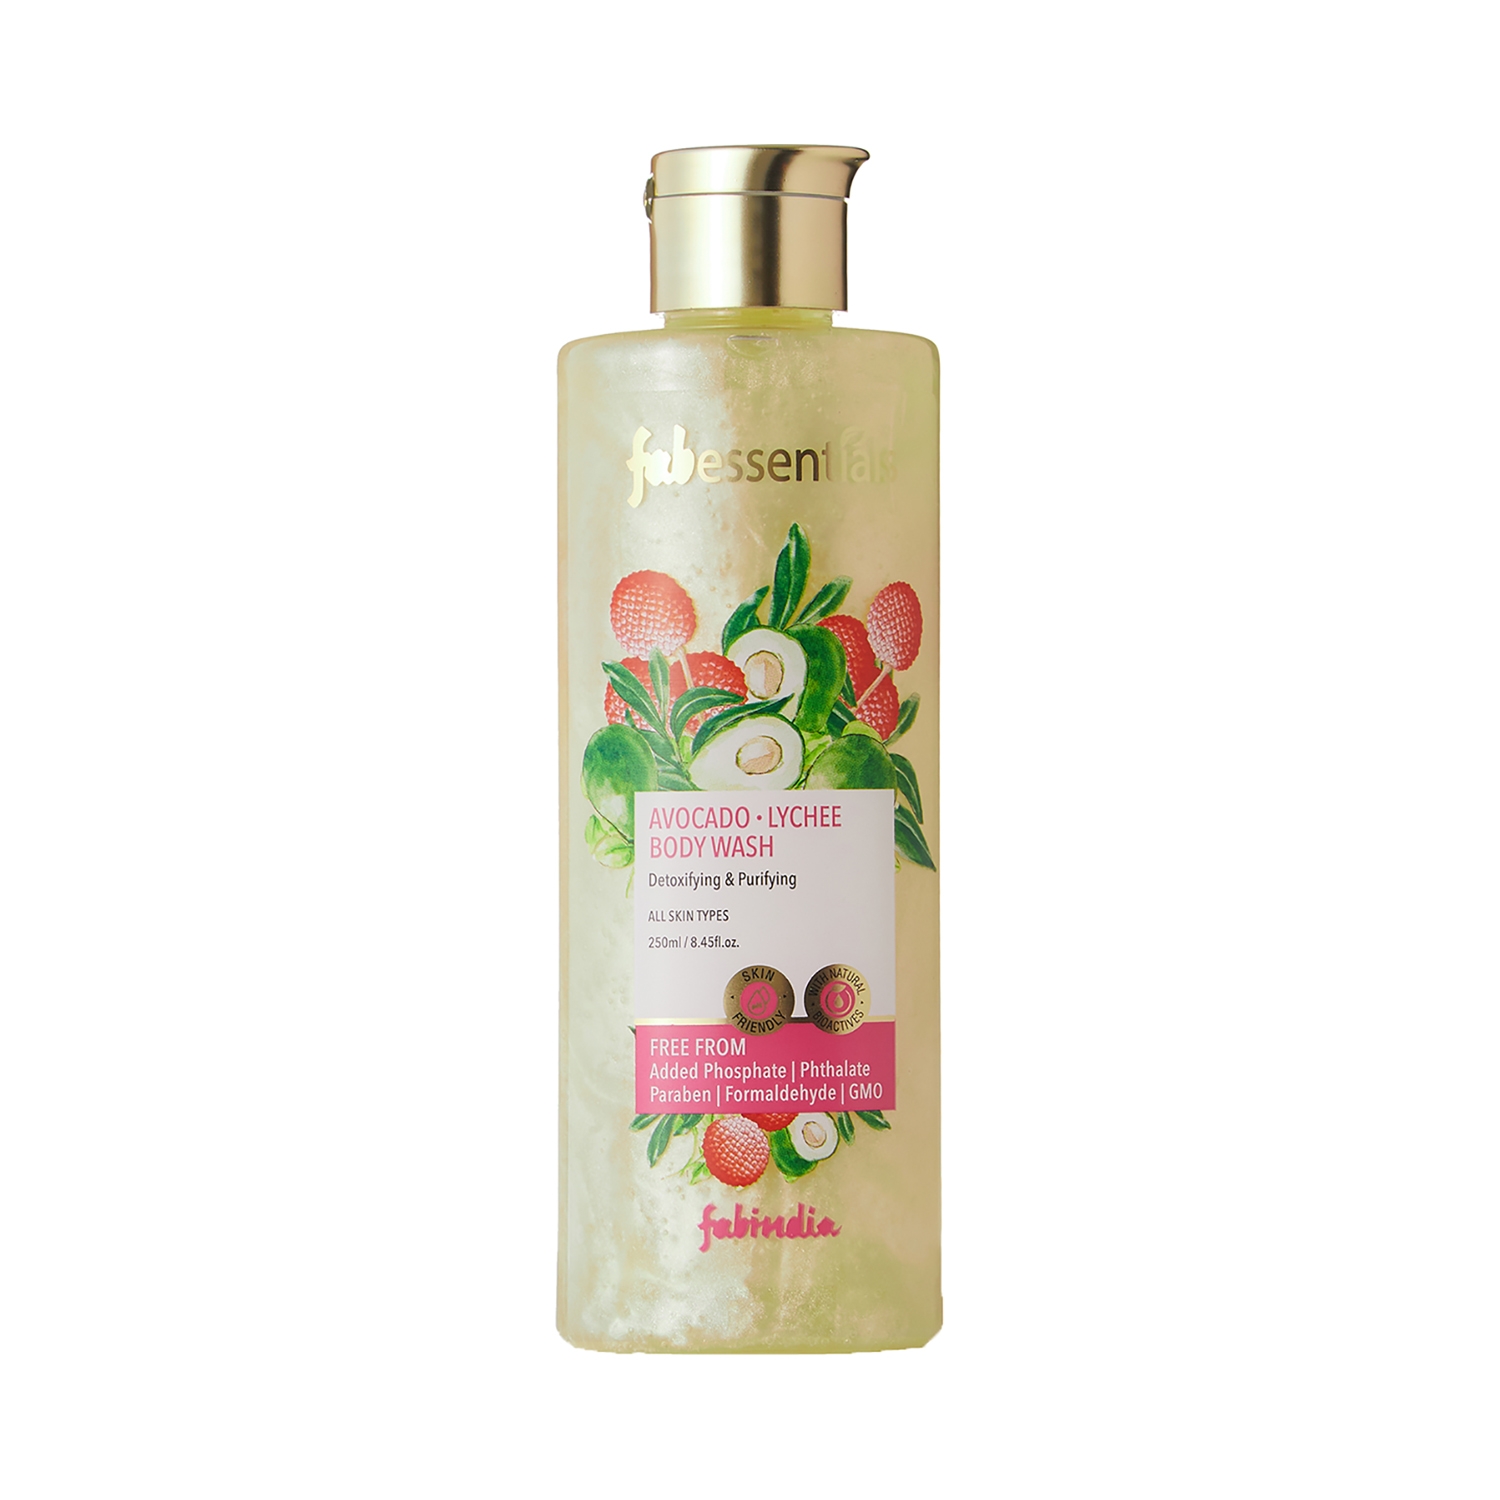 Fabessentials by Fabindia | Fabessentials by Fabindia Avocado Lychee Body Wash Infused With Almond Oil (250ml)